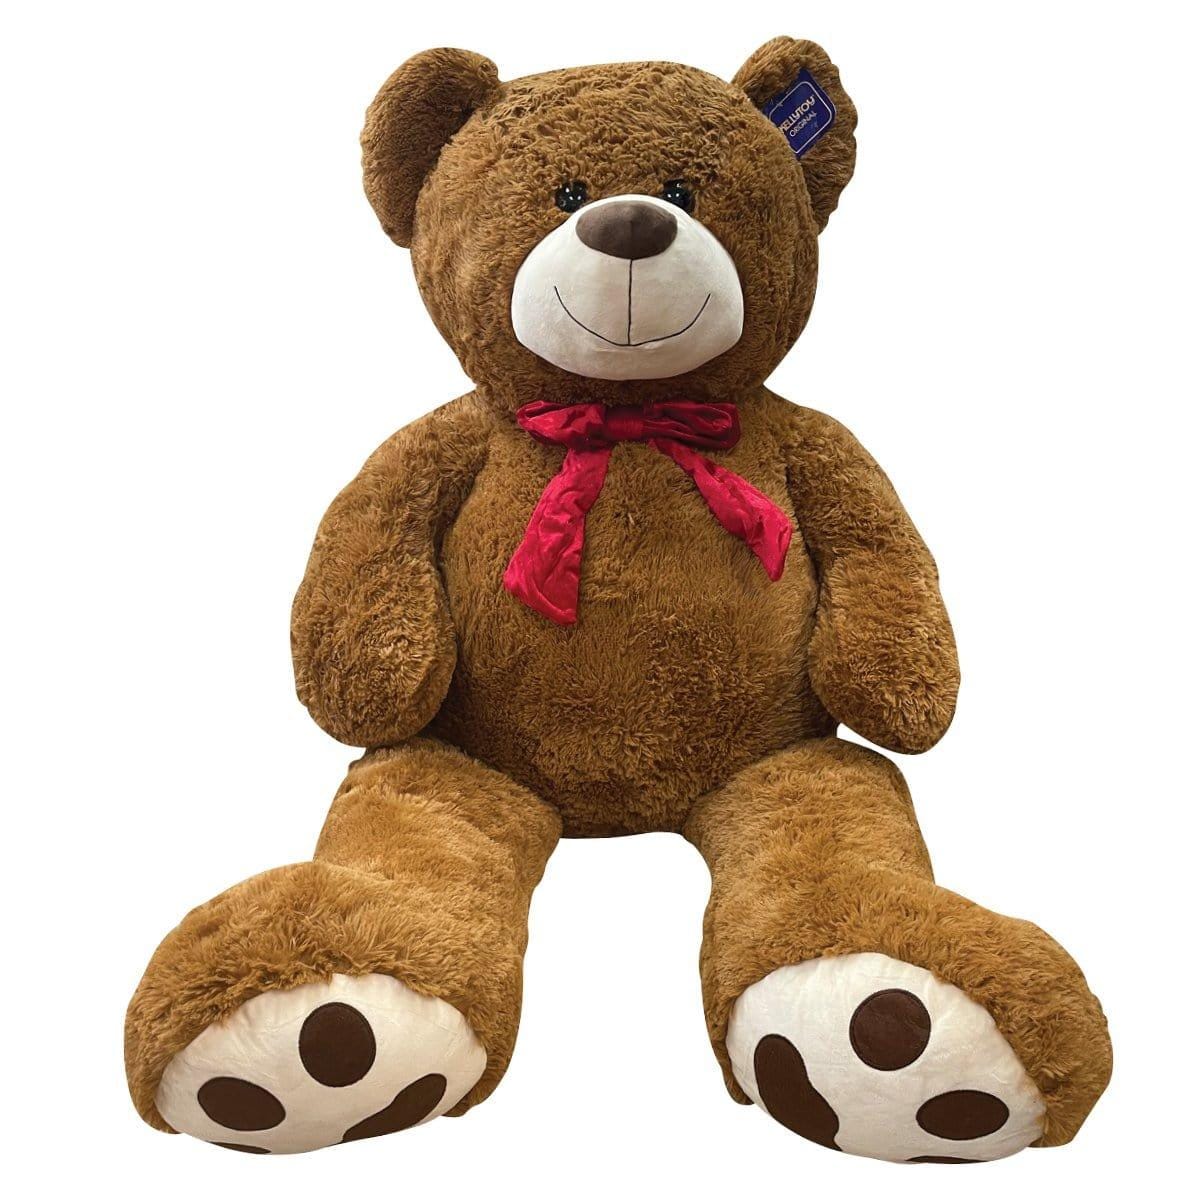 Buy Plushes Bear with bowtie plush, 60 inches - Assortment sold at Party Expert